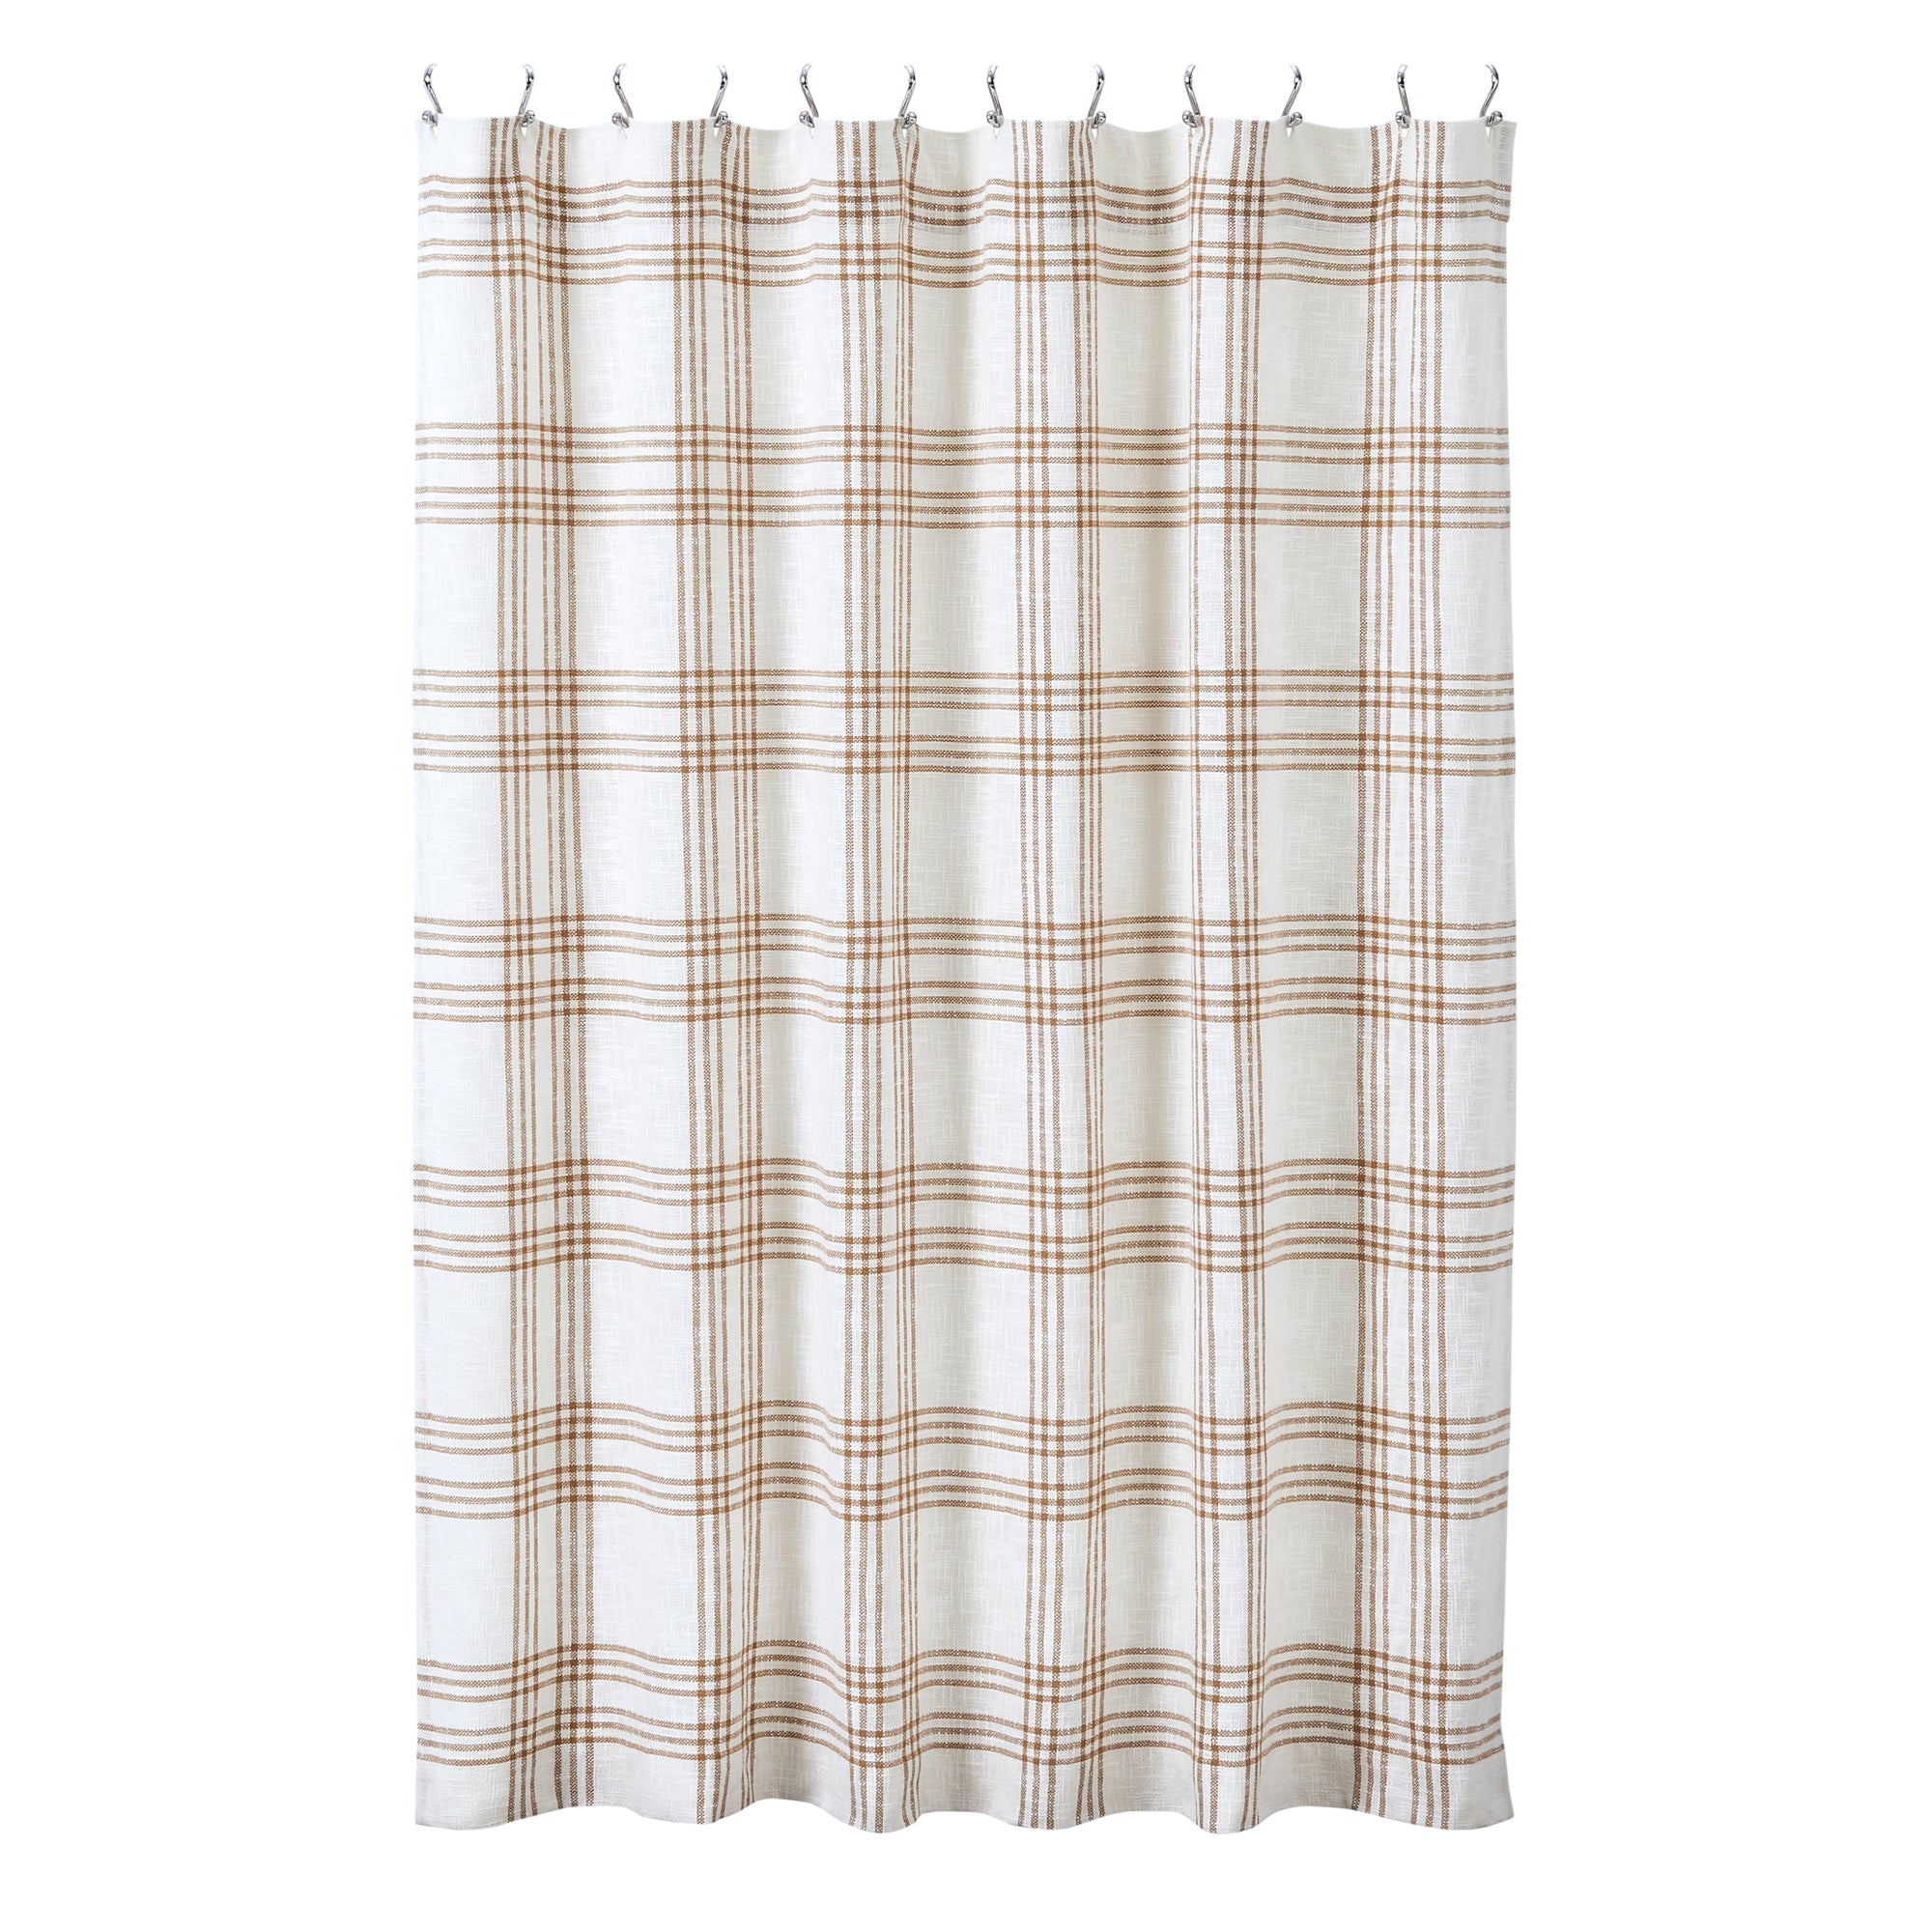 April & Olive Wheat Plaid Shower Curtain 72x72 By VHC Brands